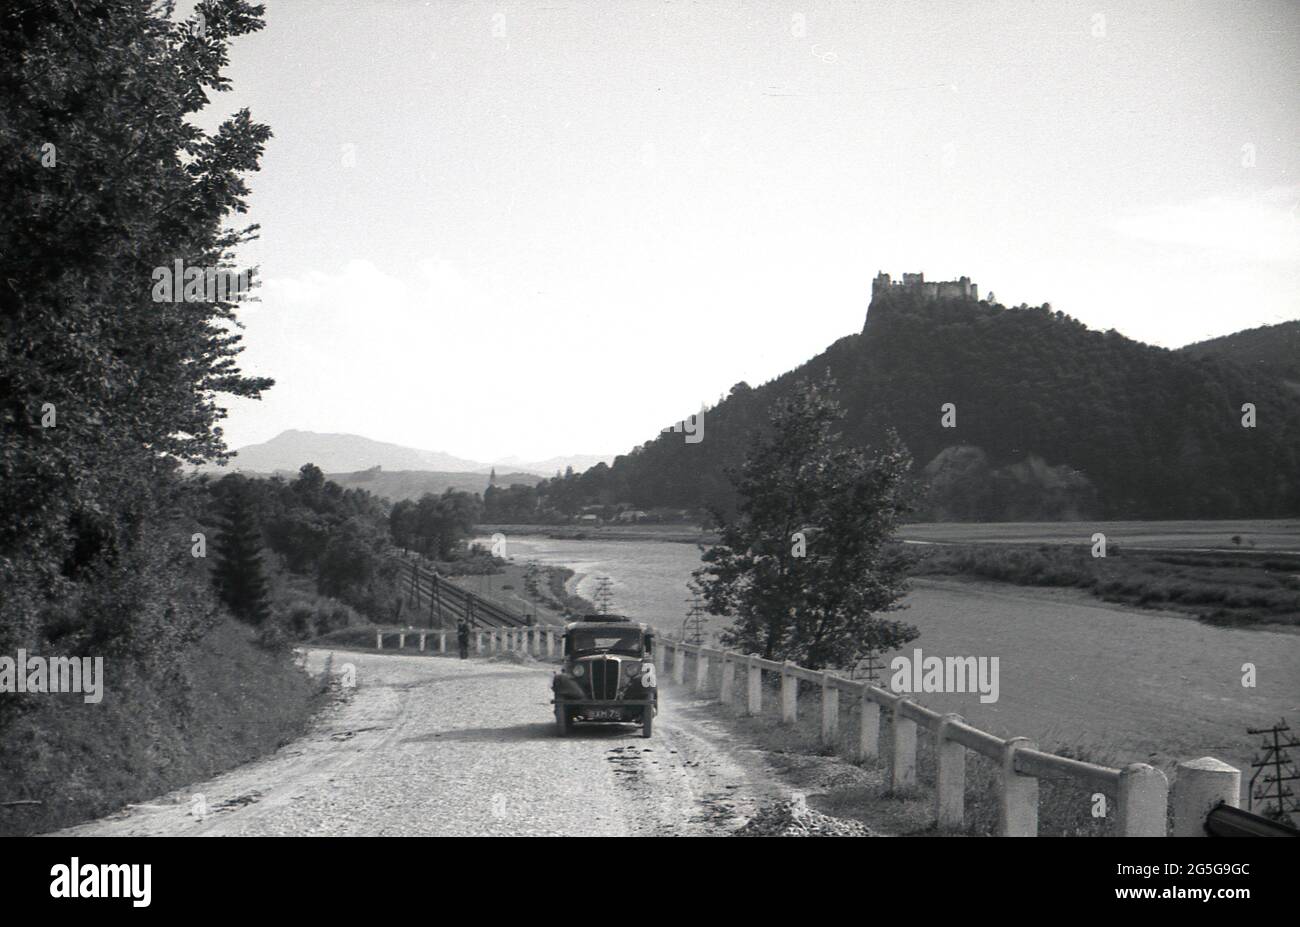 1930s, hisotrical, touring Czechoslavia pre-ww2, a British car, a Morris 8, parked on a rural gravel road, beside a rail track and river, with a castle on a hill in forest in the background. This area of Czechoslovakia, was known and referred to at this time as the Sudetenland, as they were many ethnic German people living in the western Czech lands of Bohemia. Stock Photo